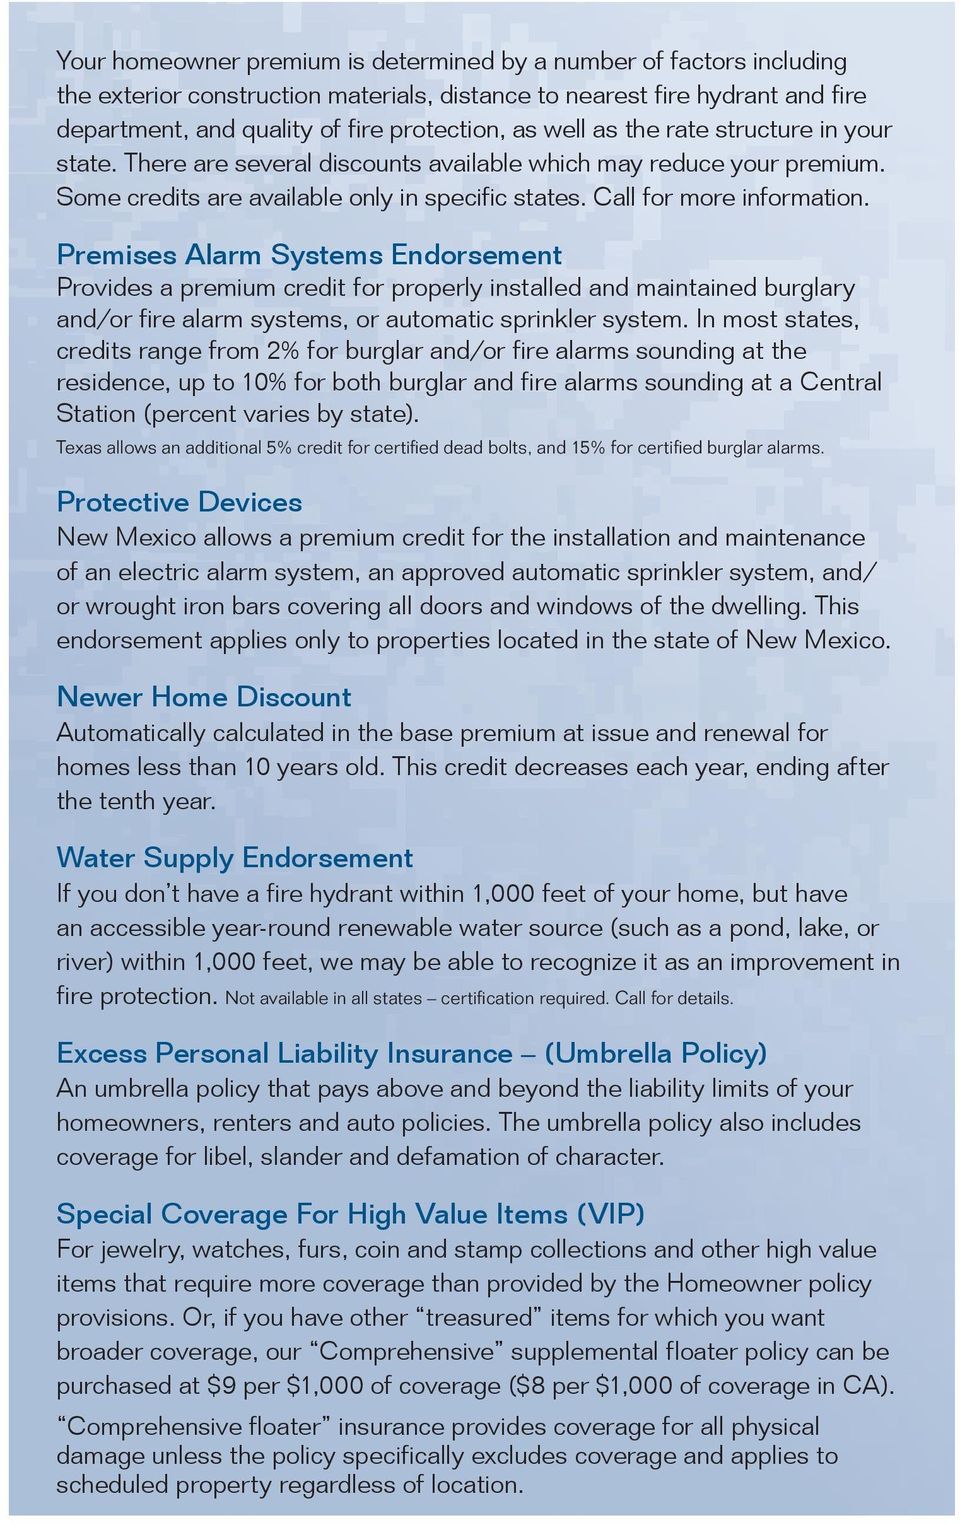 Premises Alarm Systems Endorsement Provides a premium credit for properly installed and maintained burglary and/or fire alarm systems, or automatic sprinkler system.